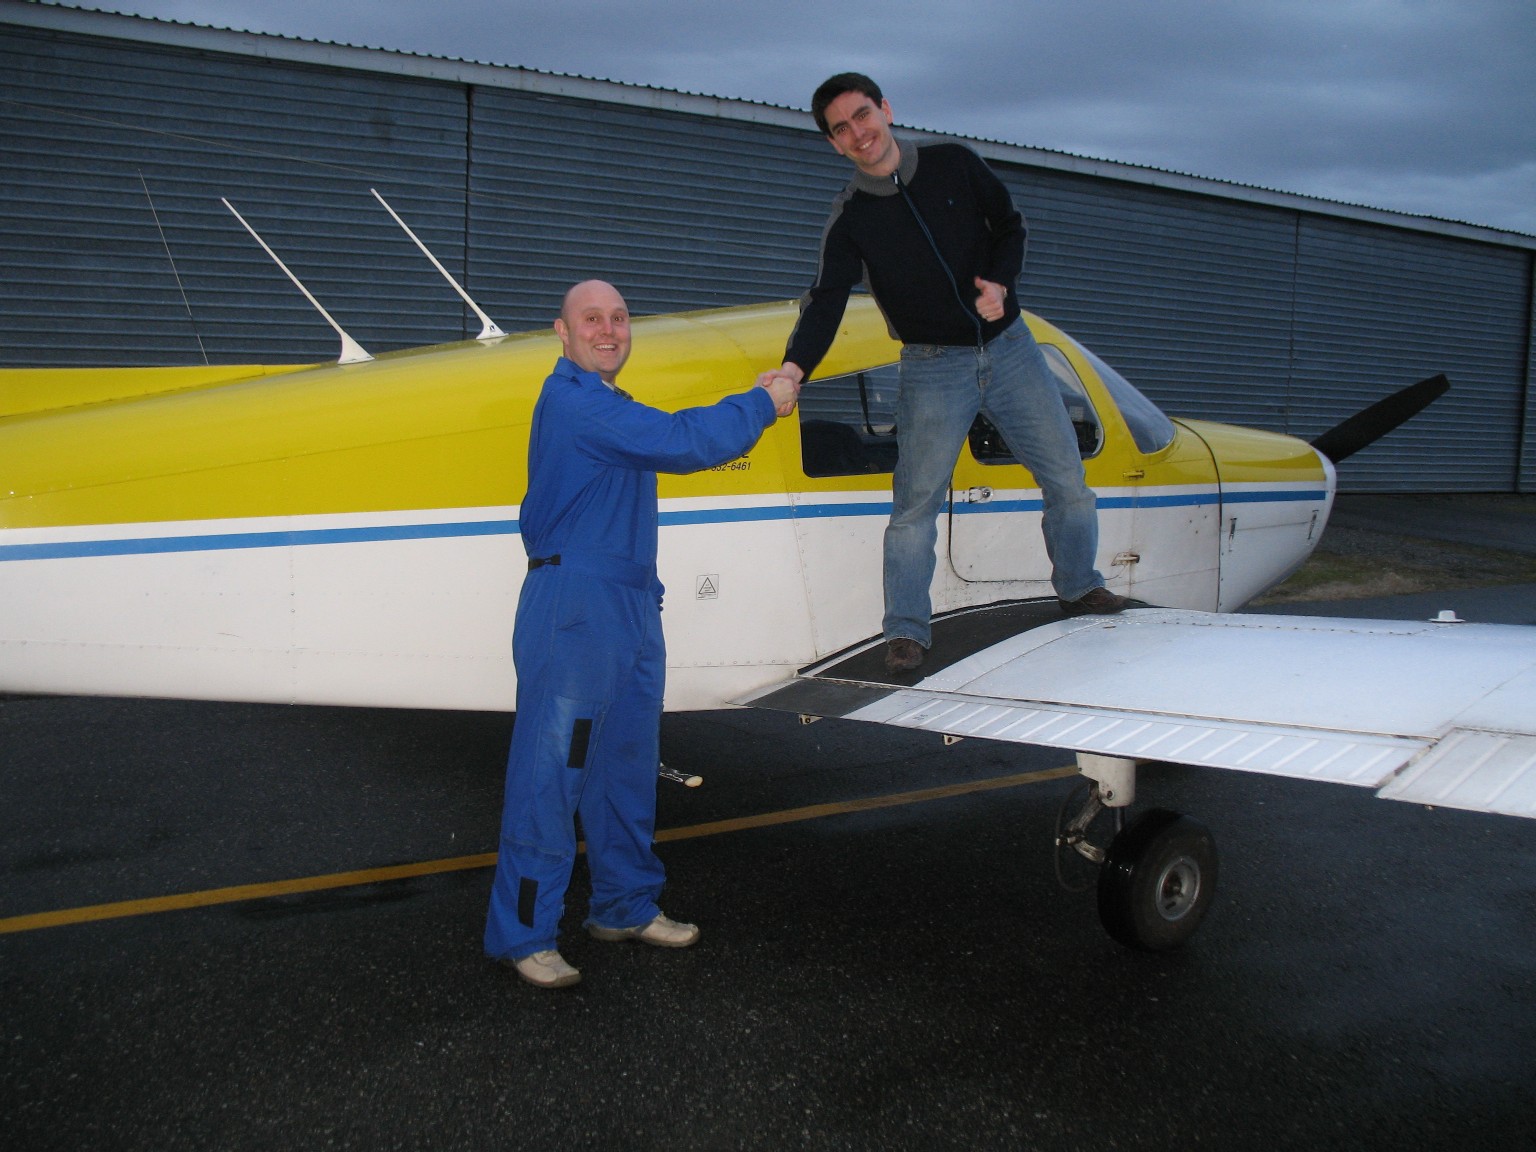 Jonathan King receives congratulations from his Flight Instructor, Rod Giesbrecht, after the completion of Jon's First Solo Flight on January 25, 2009 in Cherokee GODP.  Langley Flying School.